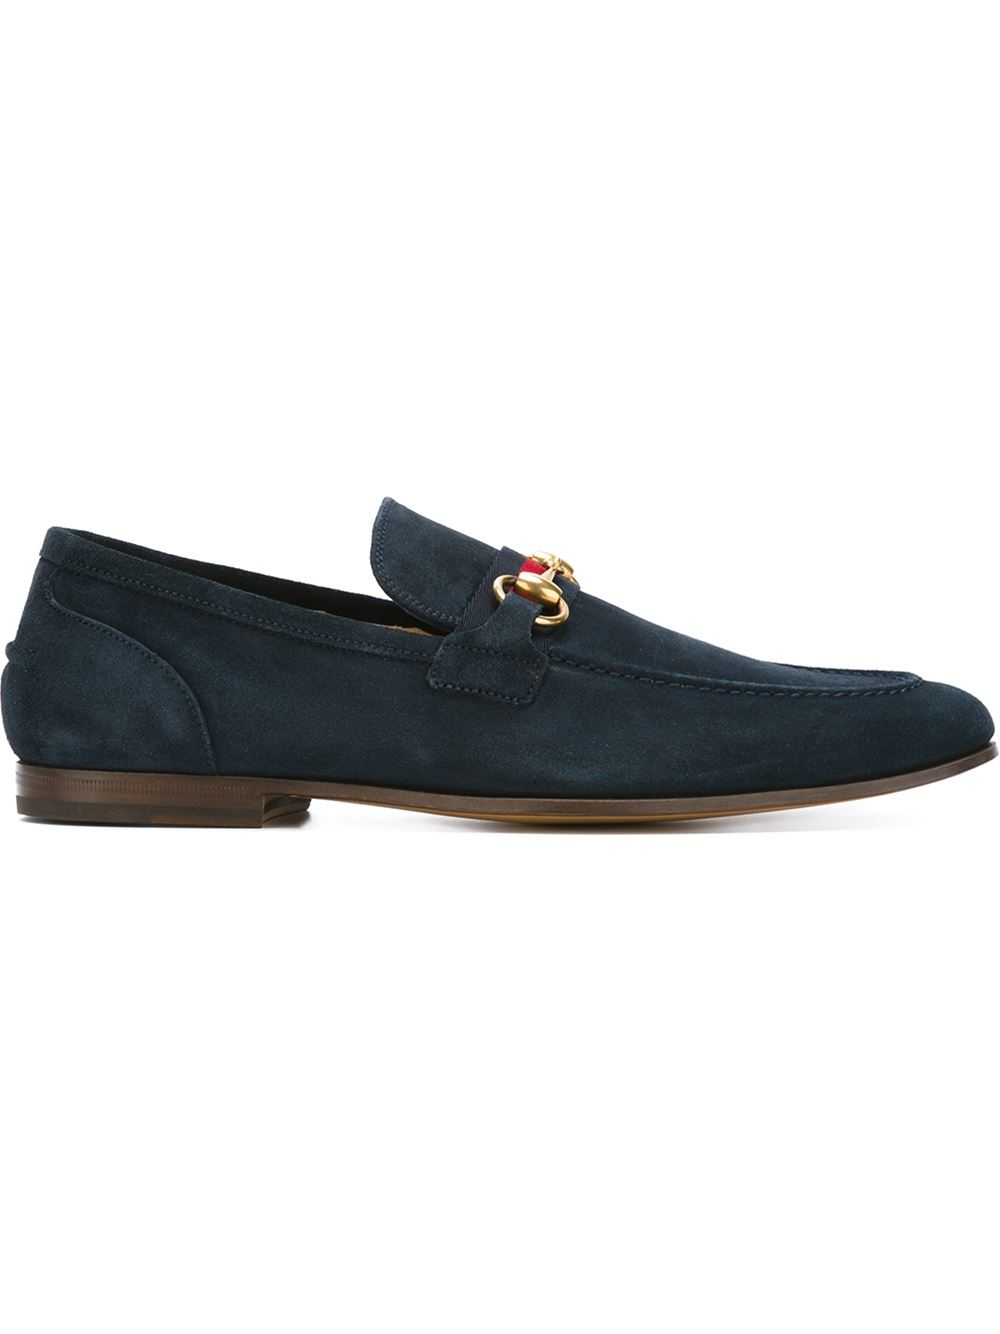 Gucci Suede Loafers in Blue for Men - Lyst